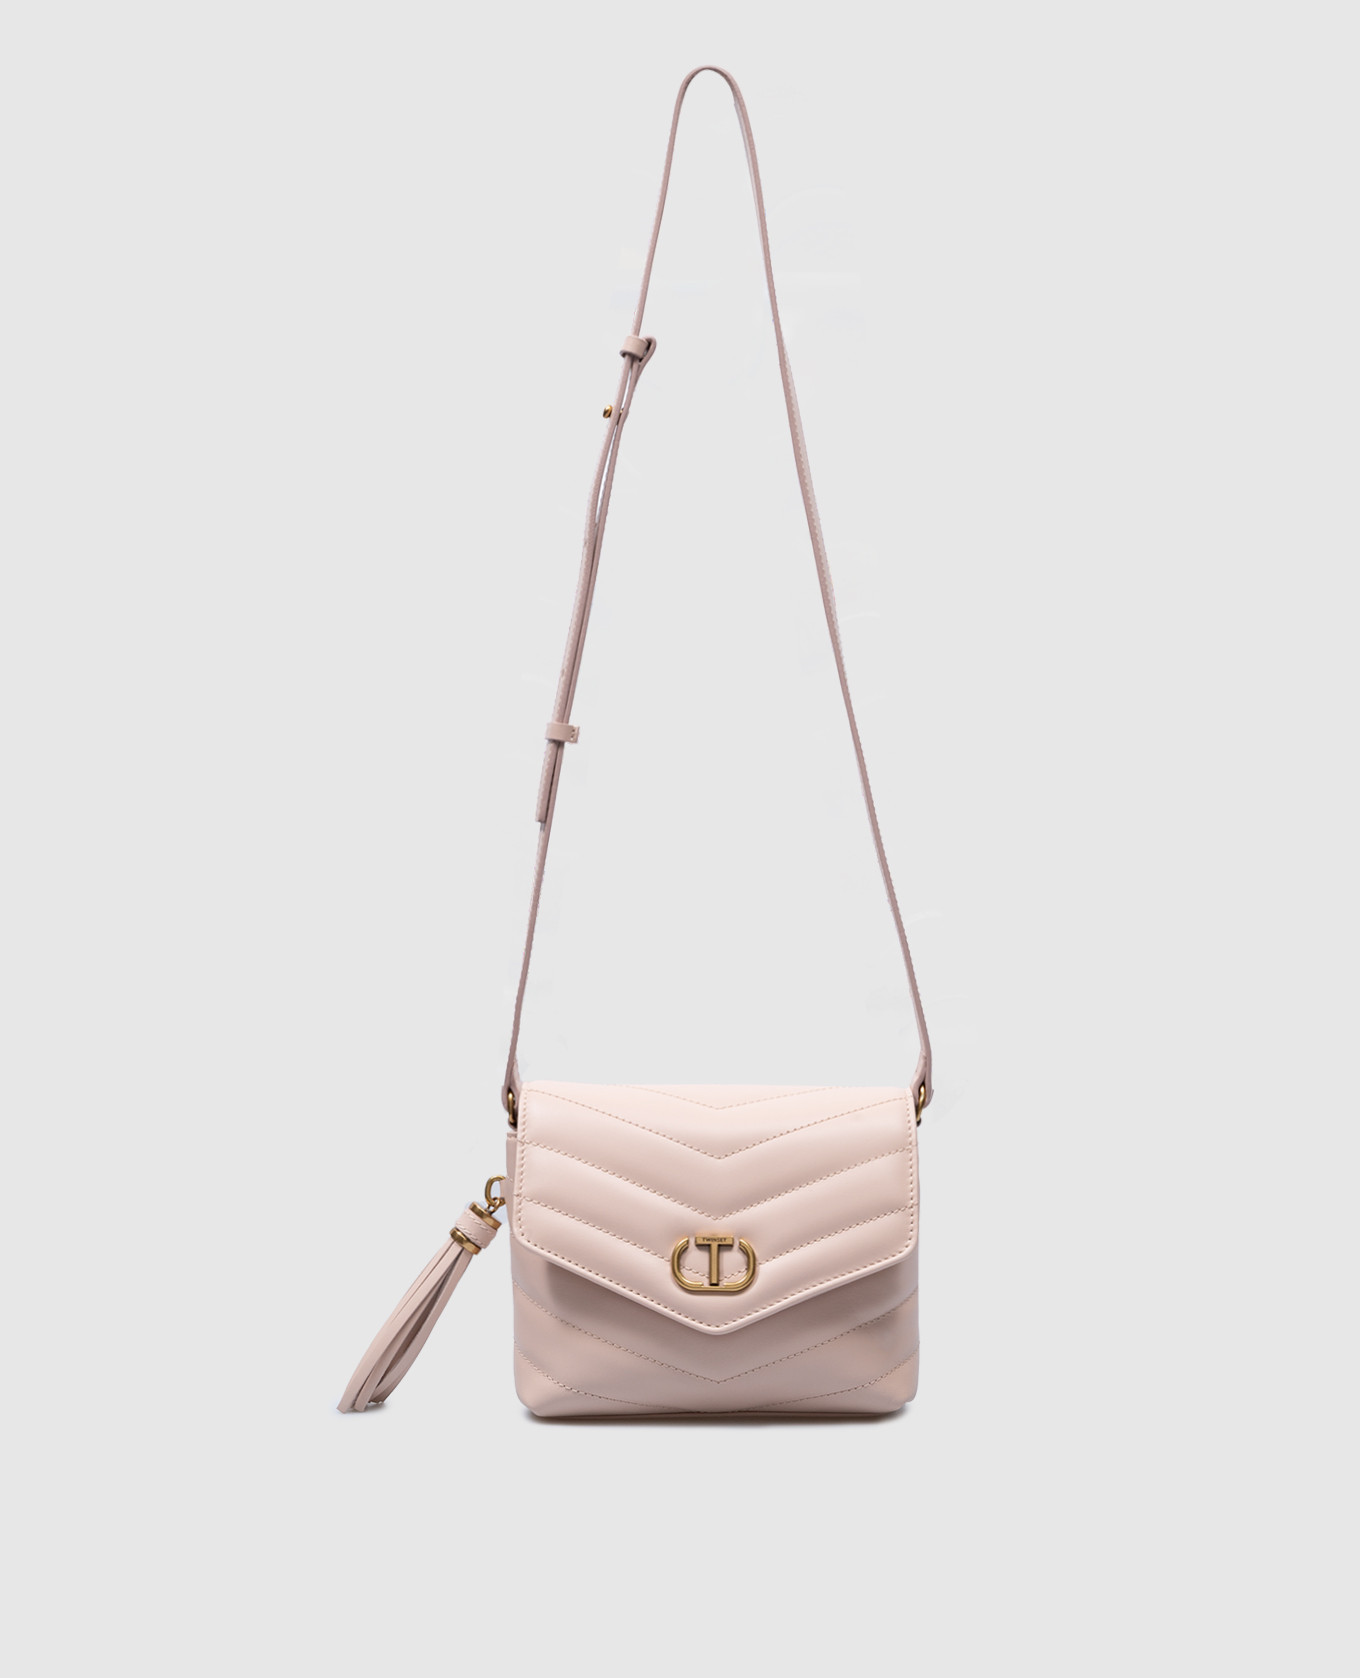 Beige quilted bag with metallic logo